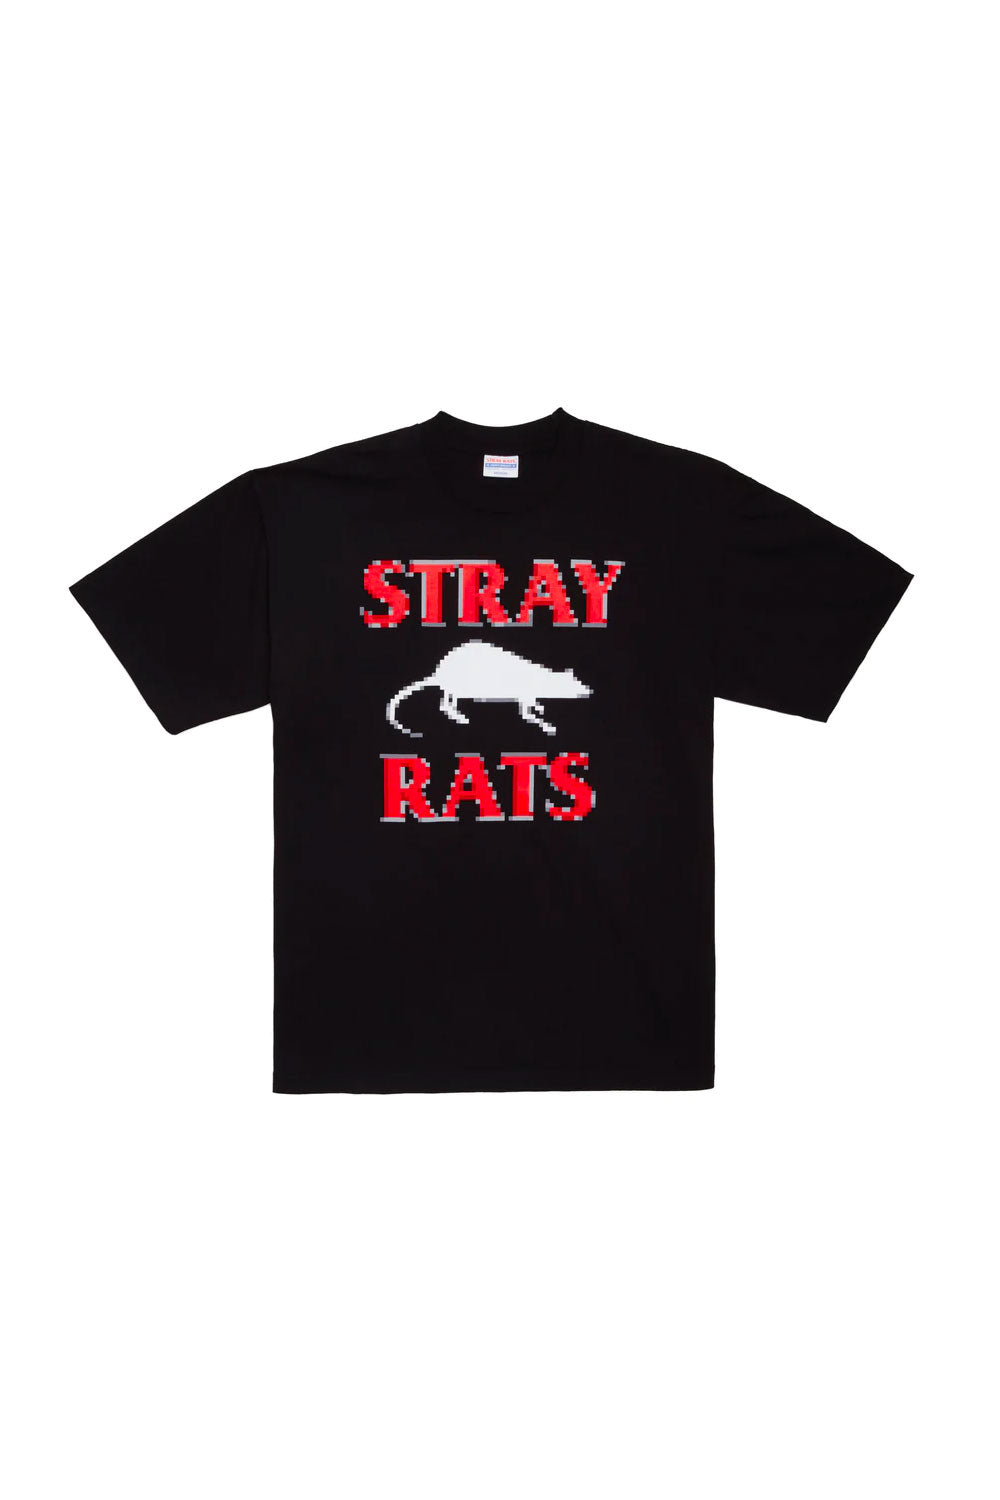 The STRAY RATS - PIXEL RODENTICIDE TEE BLACK available online with global shipping, and in PAM Stores Melbourne and Sydney.